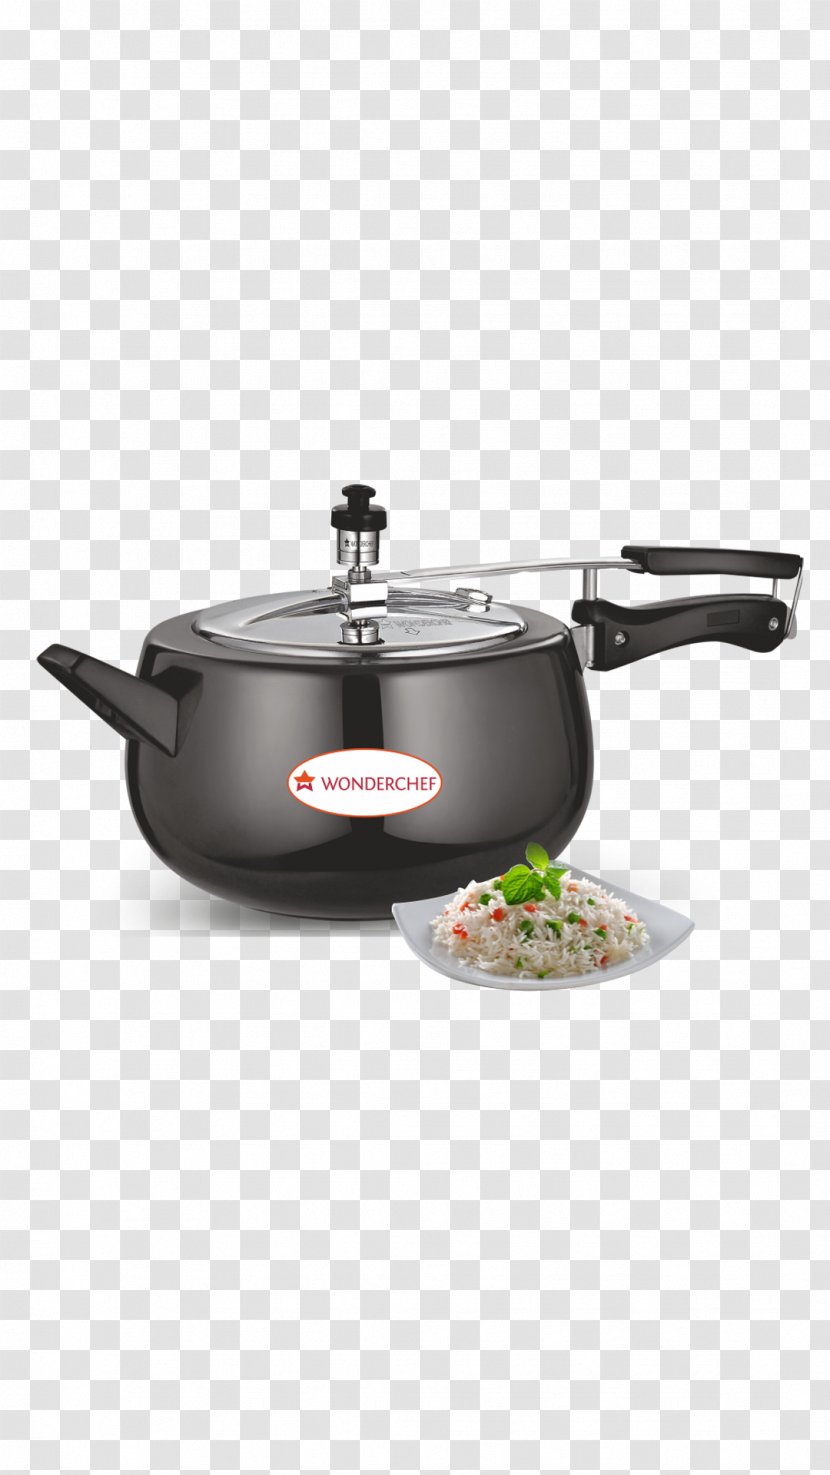 Wonderchef Pressure Cooking Stainless Steel Anodizing Lid - Cookware And Bakeware - Frying Pan Transparent PNG